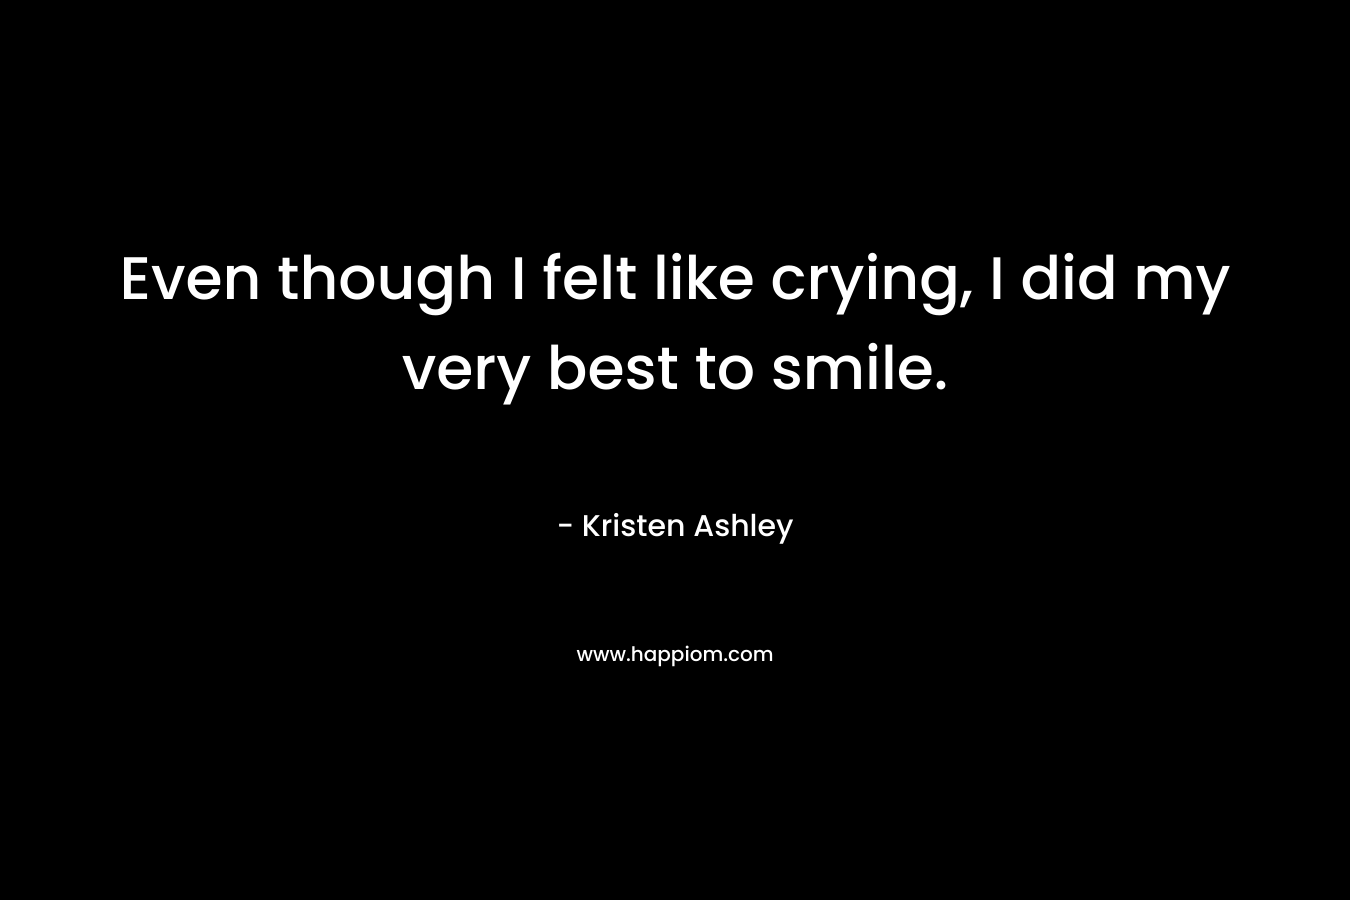 Even though I felt like crying, I did my very best to smile. – Kristen Ashley